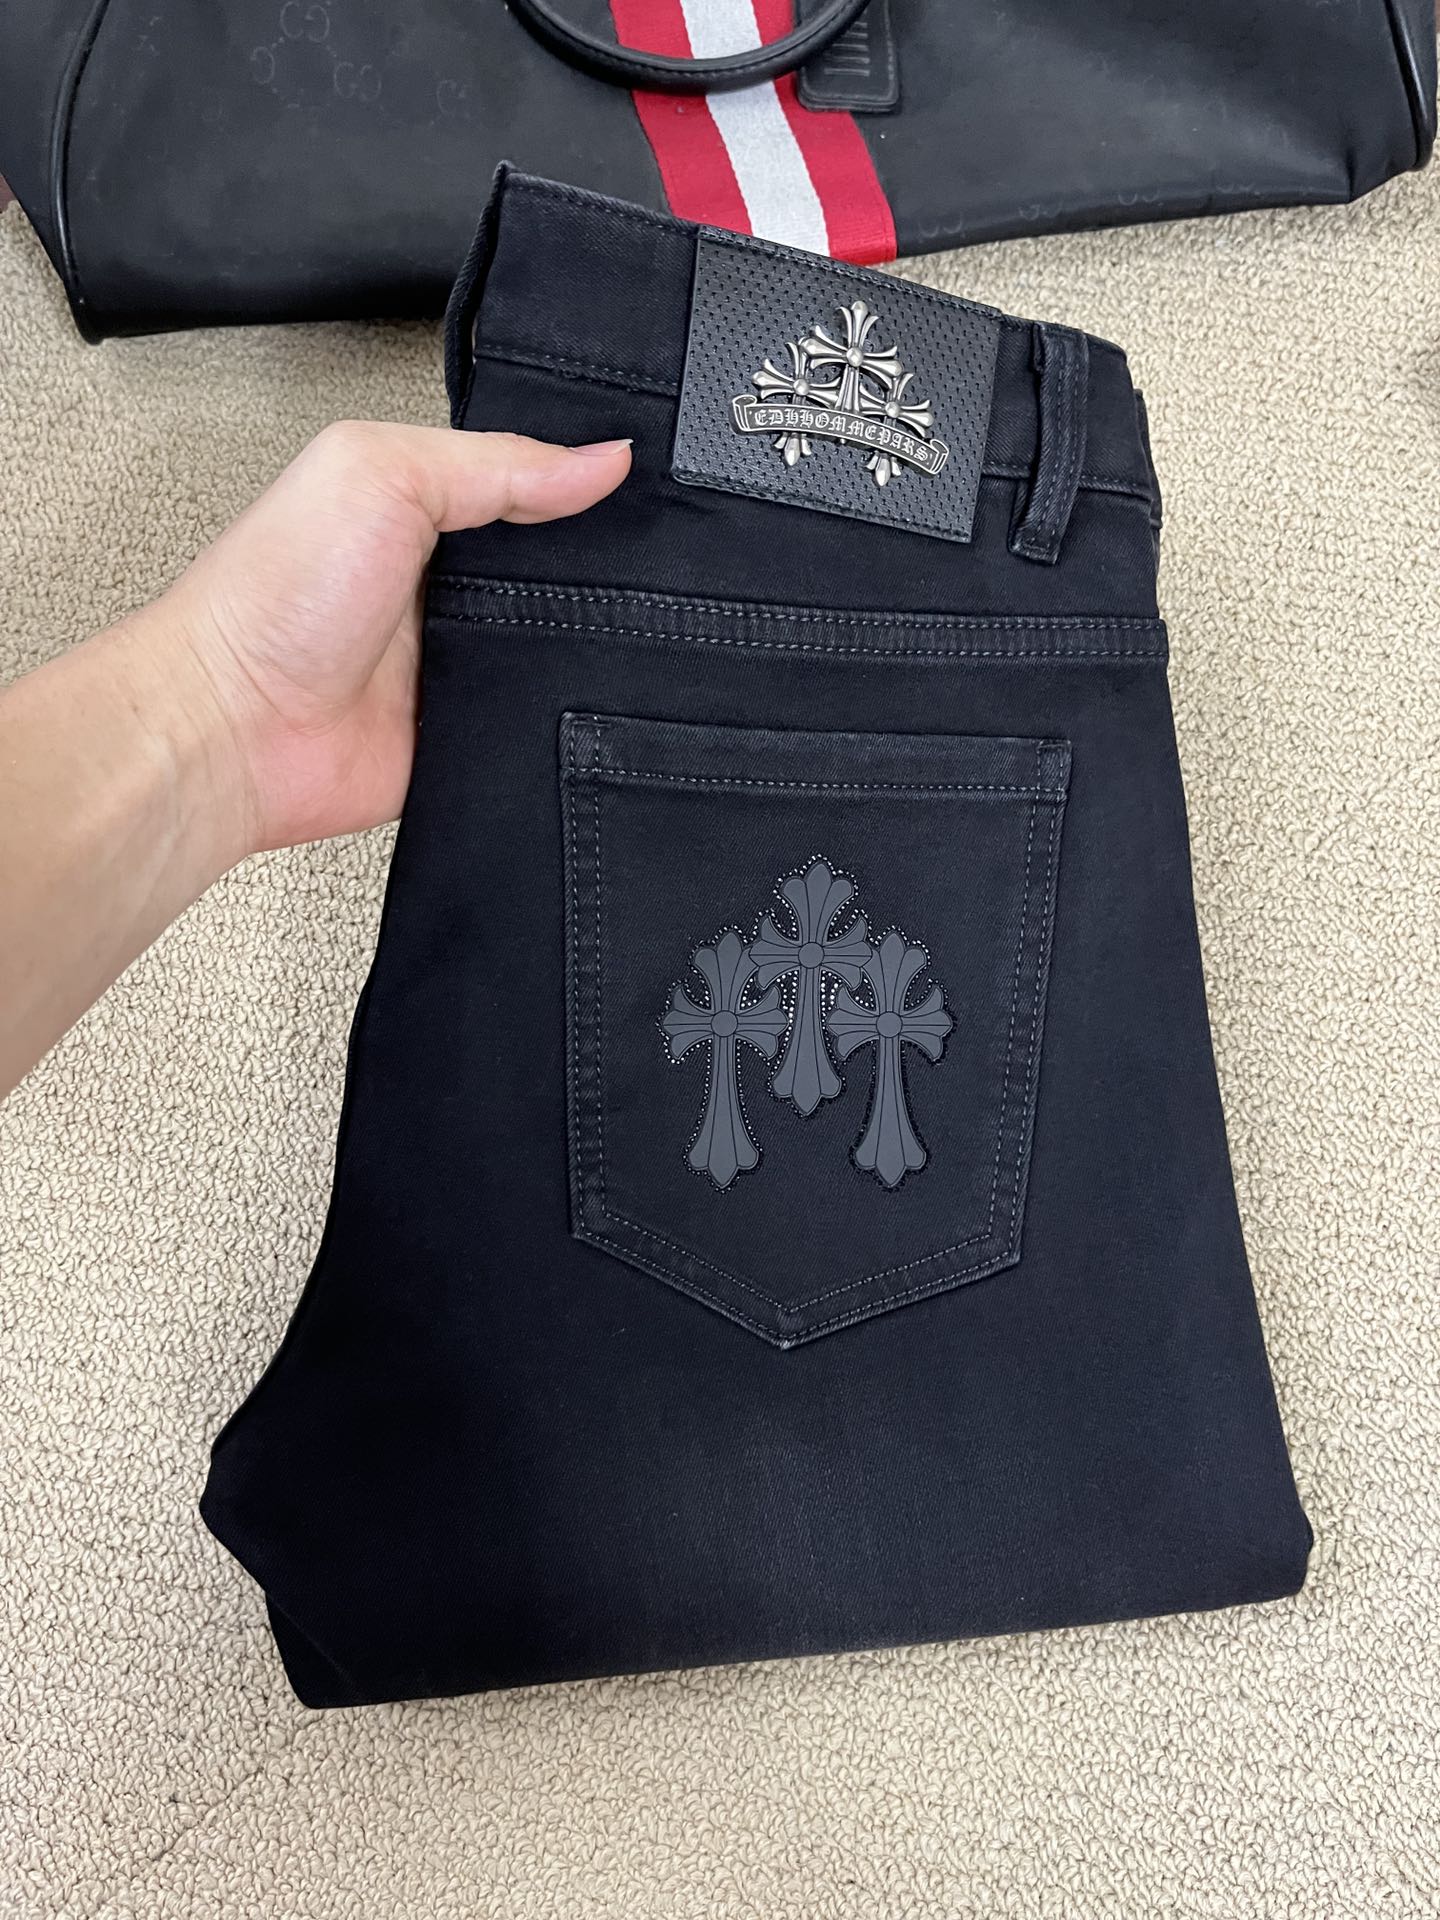 Chrome Hearts mirror quality
 Clothing Jeans Men Fall/Winter Collection Fashion